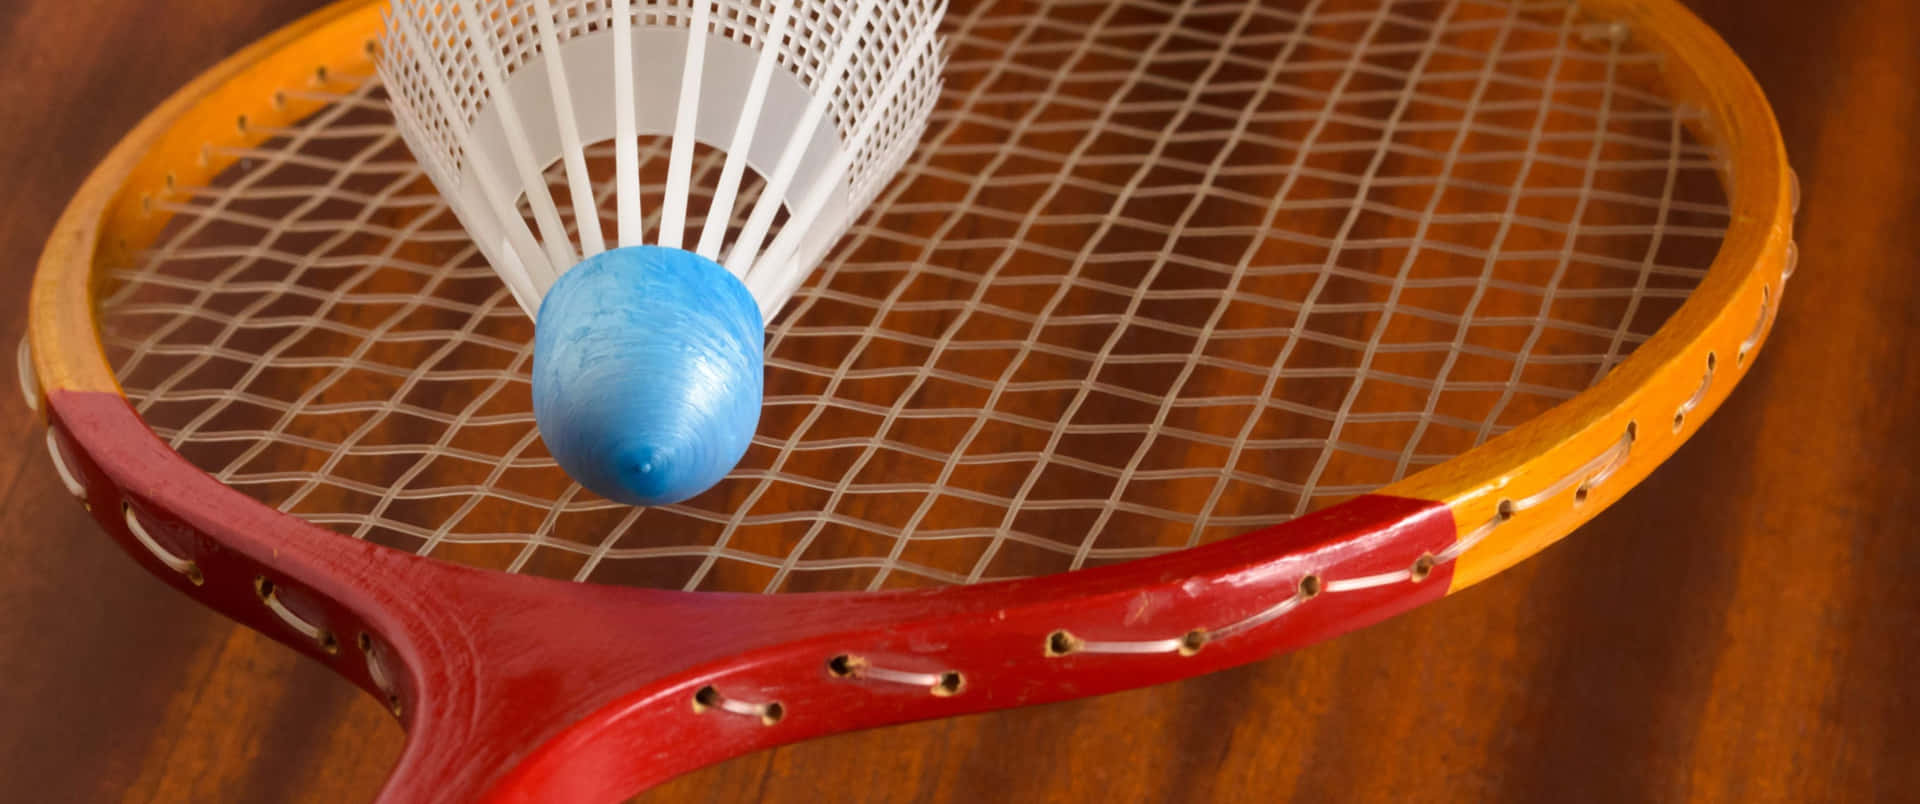 Ready, set, volley! An up-close look at a Badminton match on a 3440x1440p background.